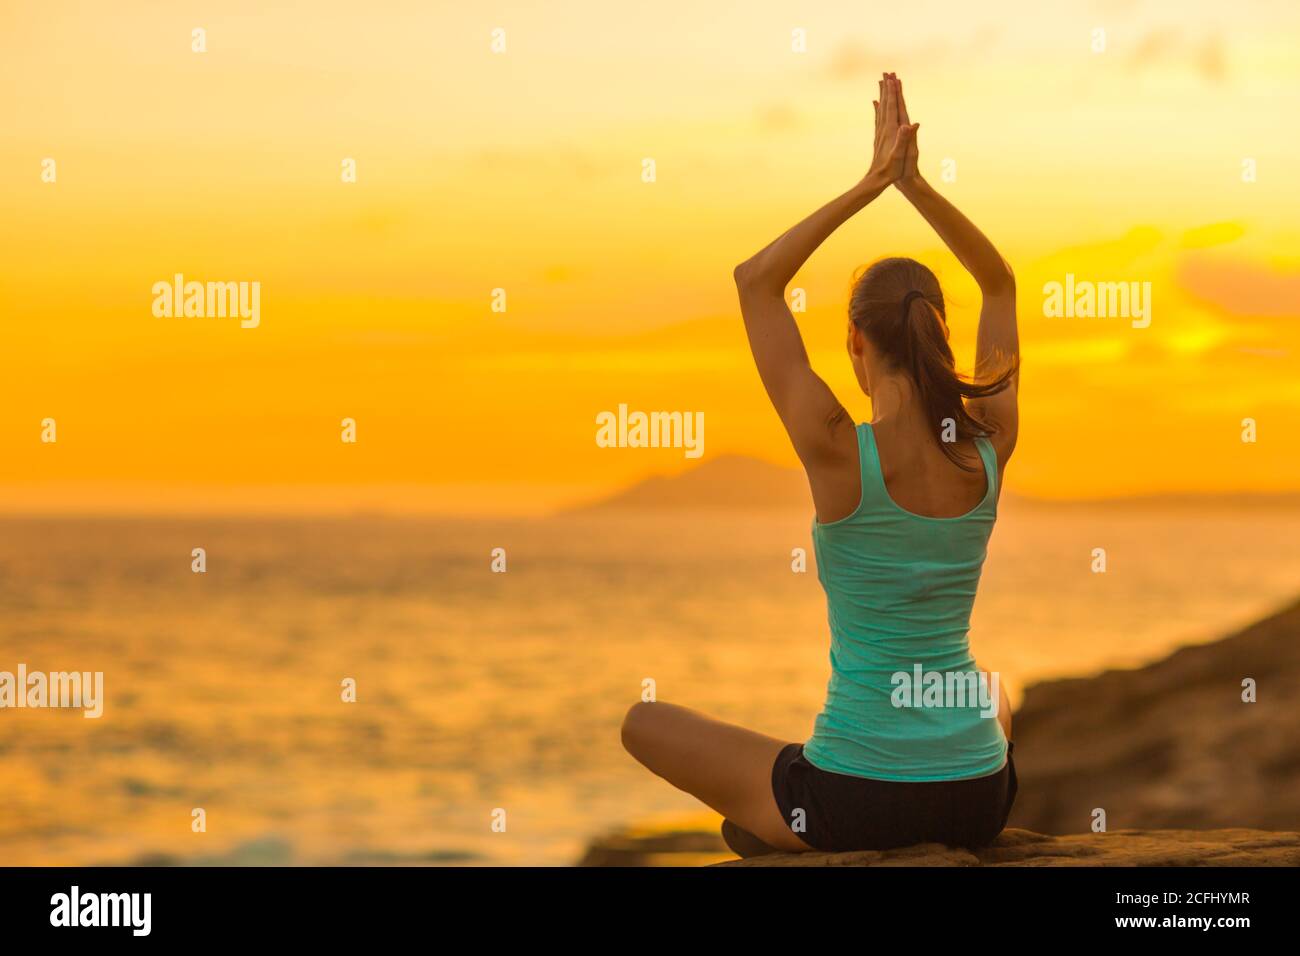 Healthy woman doing yoga meditation exercise at peace on the beach during a beautiful sunset in Hawaii. Body and mind wellness. Stock Photo